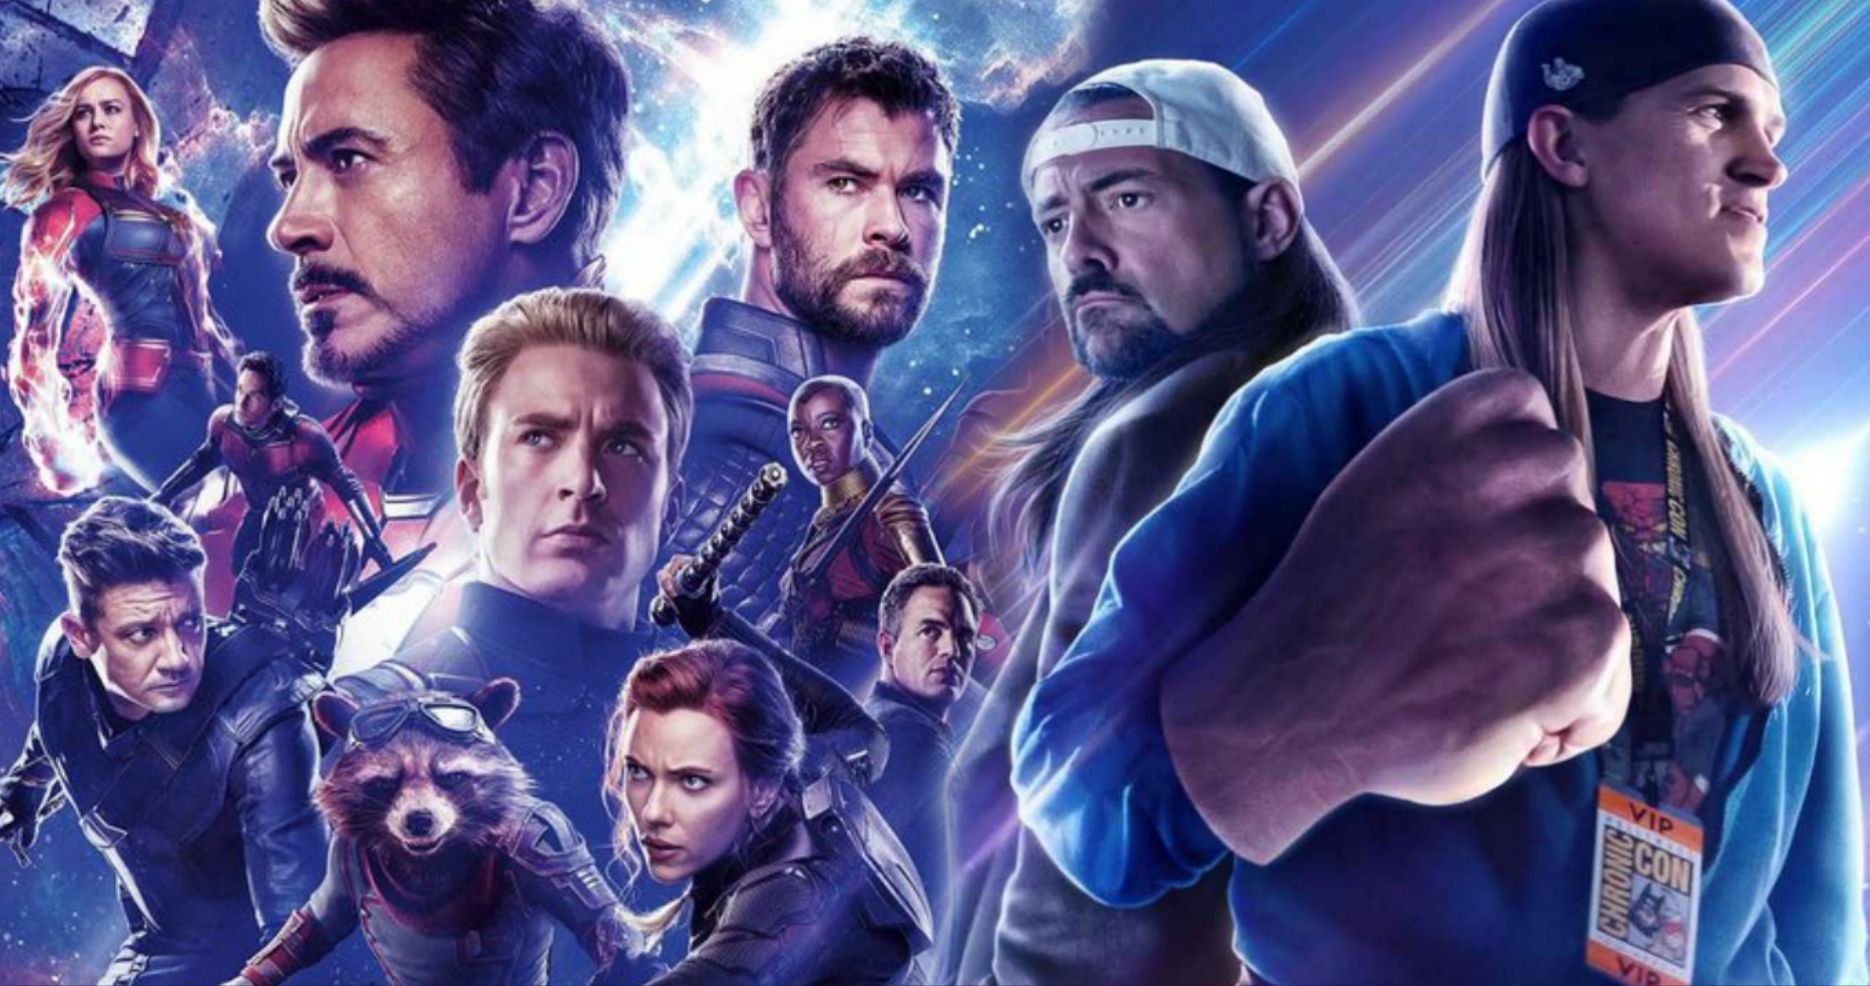 Jay and Silent Bob Reboot Has Snapped Away an Avengers: Endgame Box Office Record